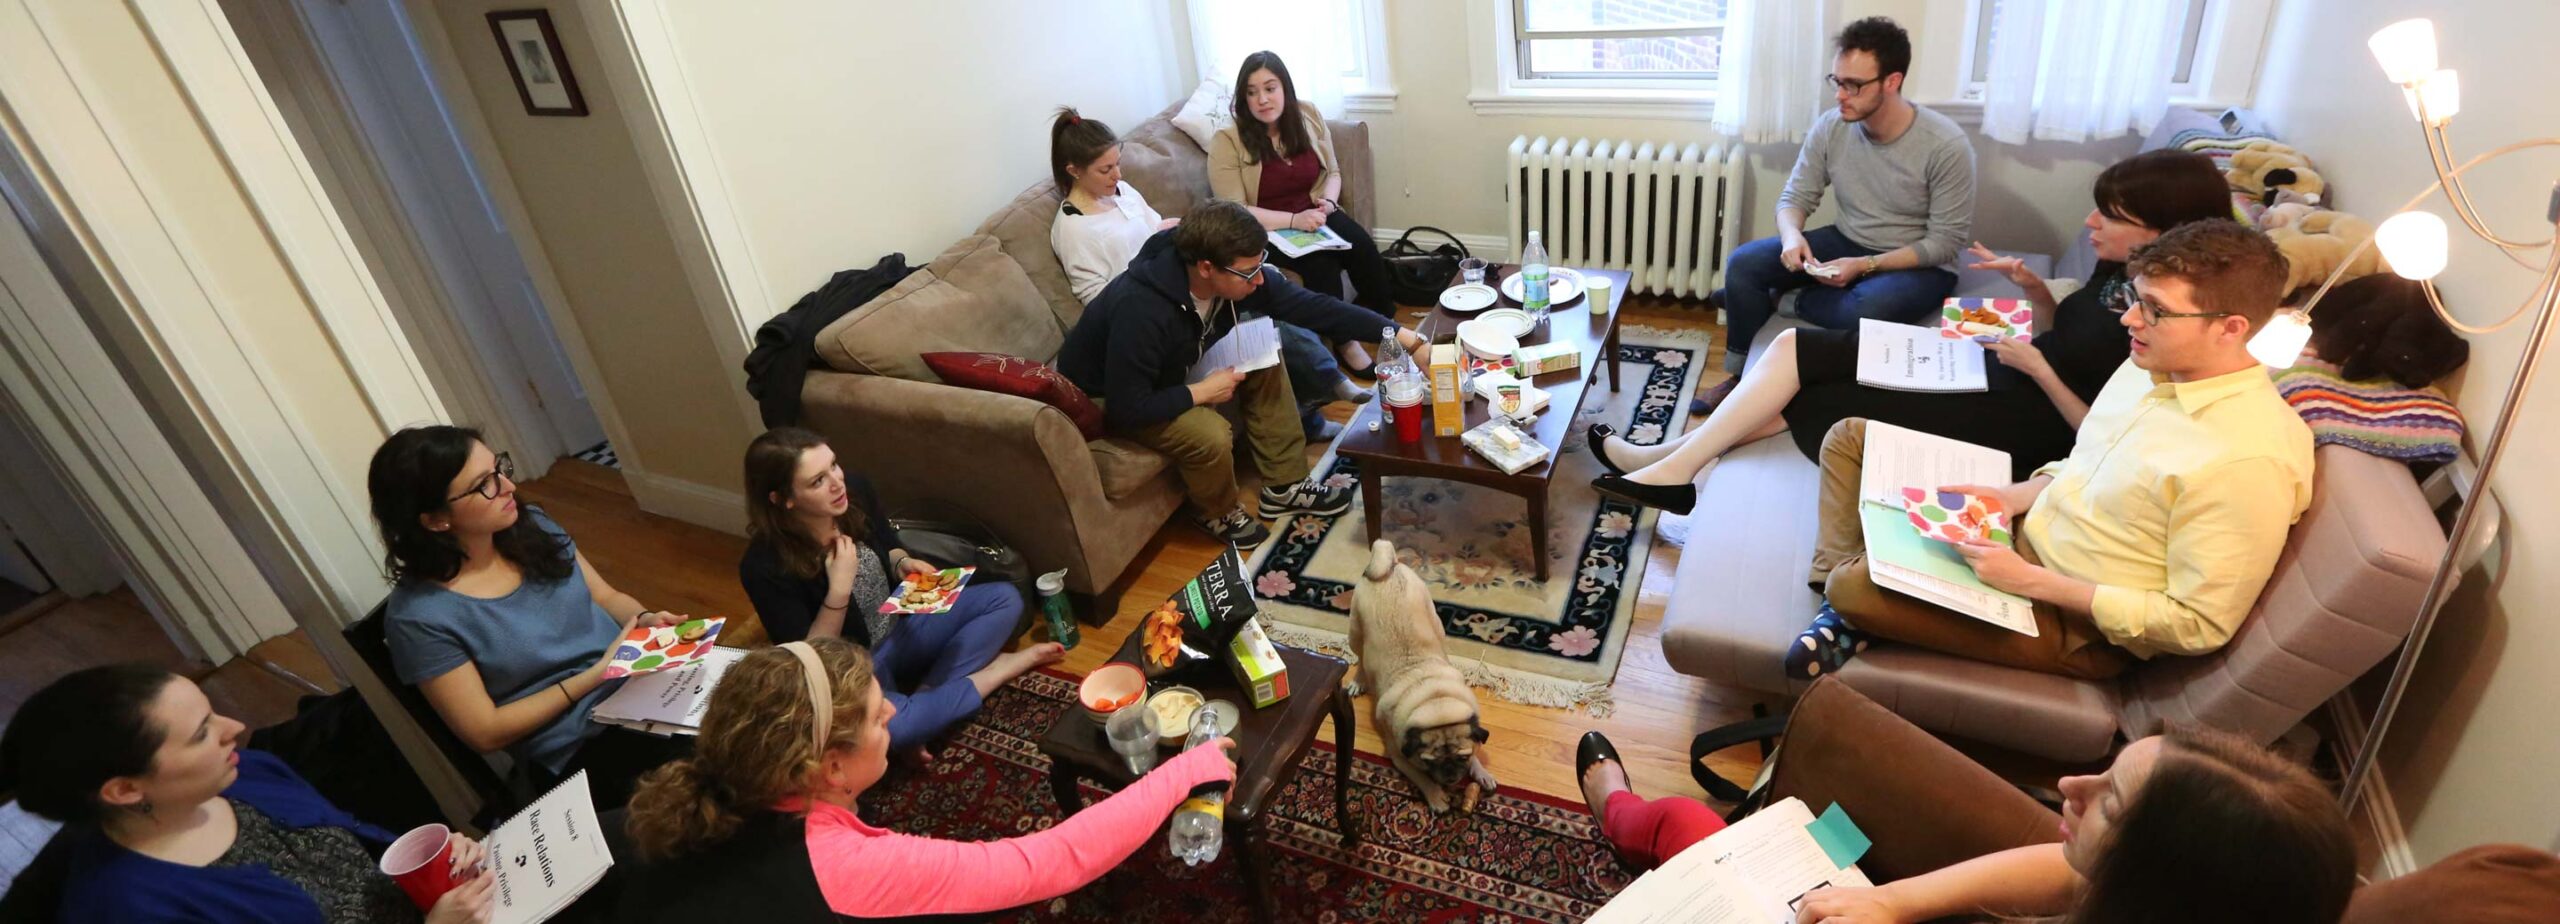 young adults talking in living room